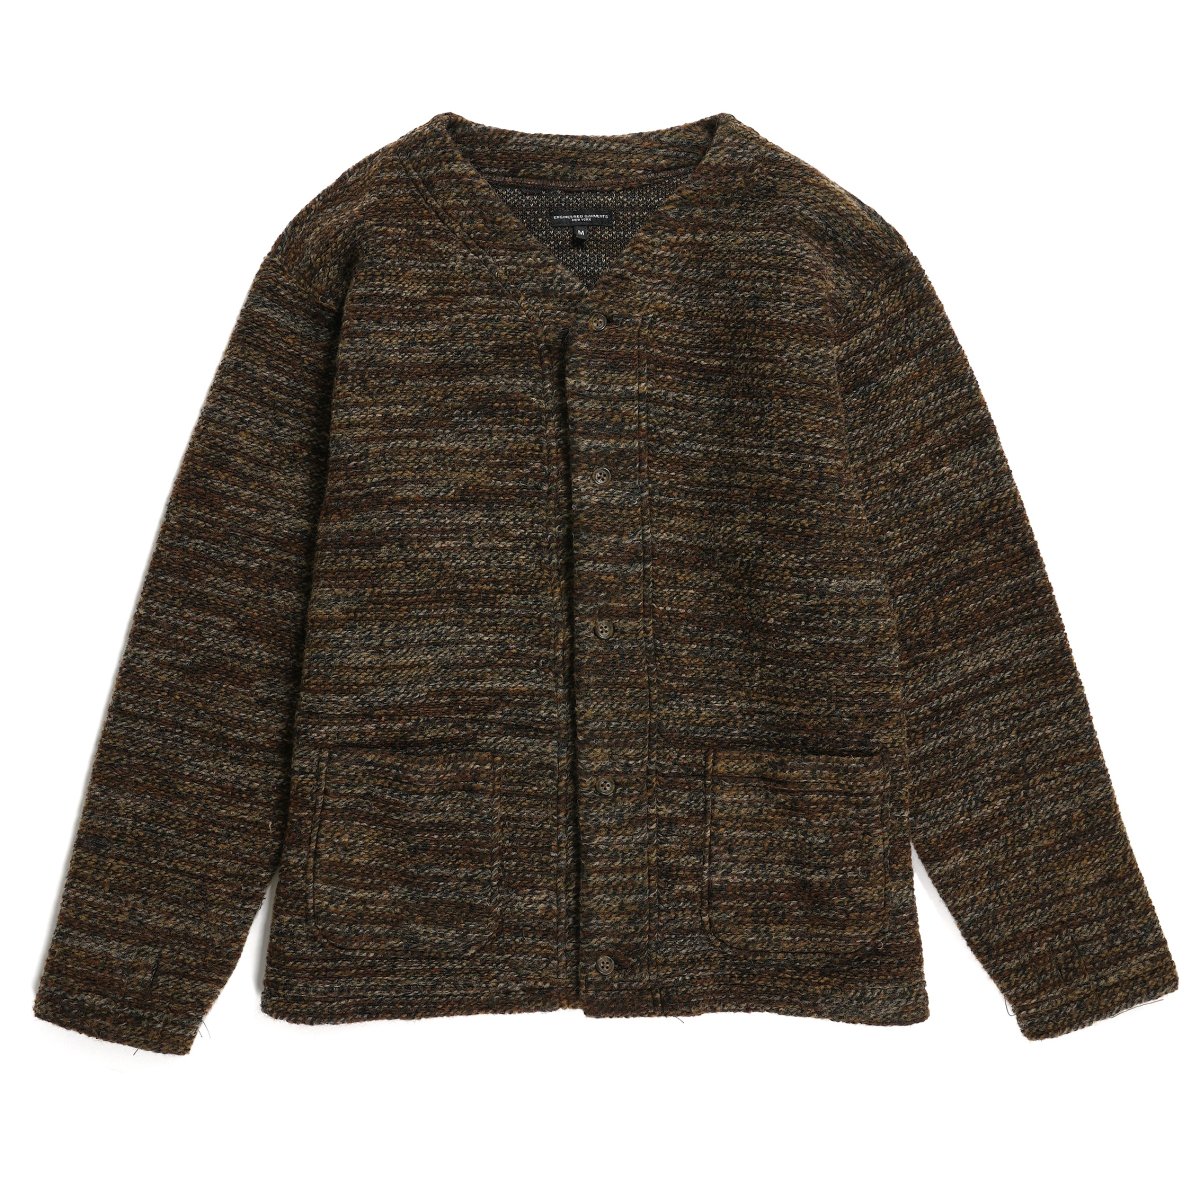 Engineered Garments <BR>Knit Cardigan - Poly Wool Melange Knit - (BROWN) SOLD OUT

